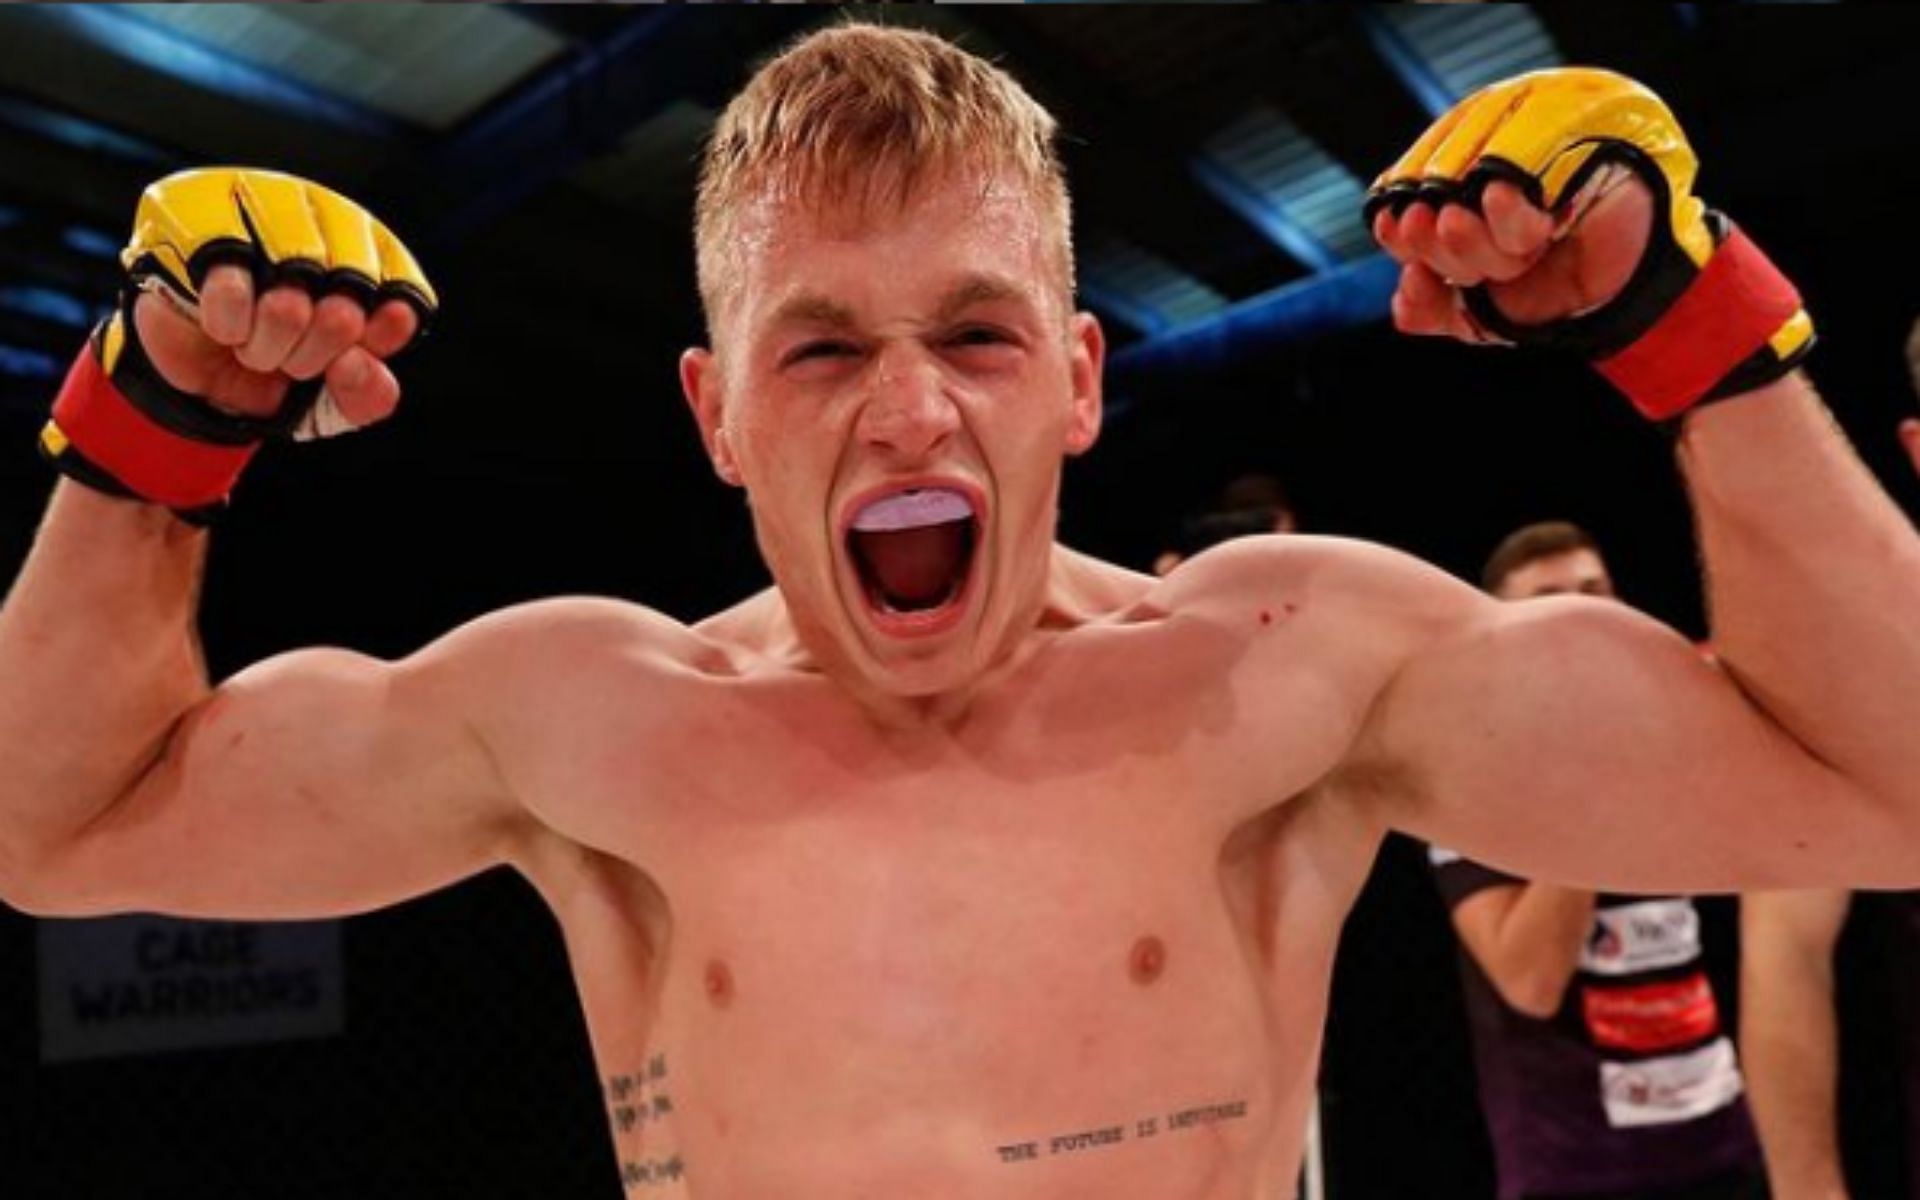 UFC welterweight superstar Ian Garry reacts after securing a victory at UK-based Cage Warriors, where he is a former welterweight champion (Image Credit: @iangarry on Instagram)